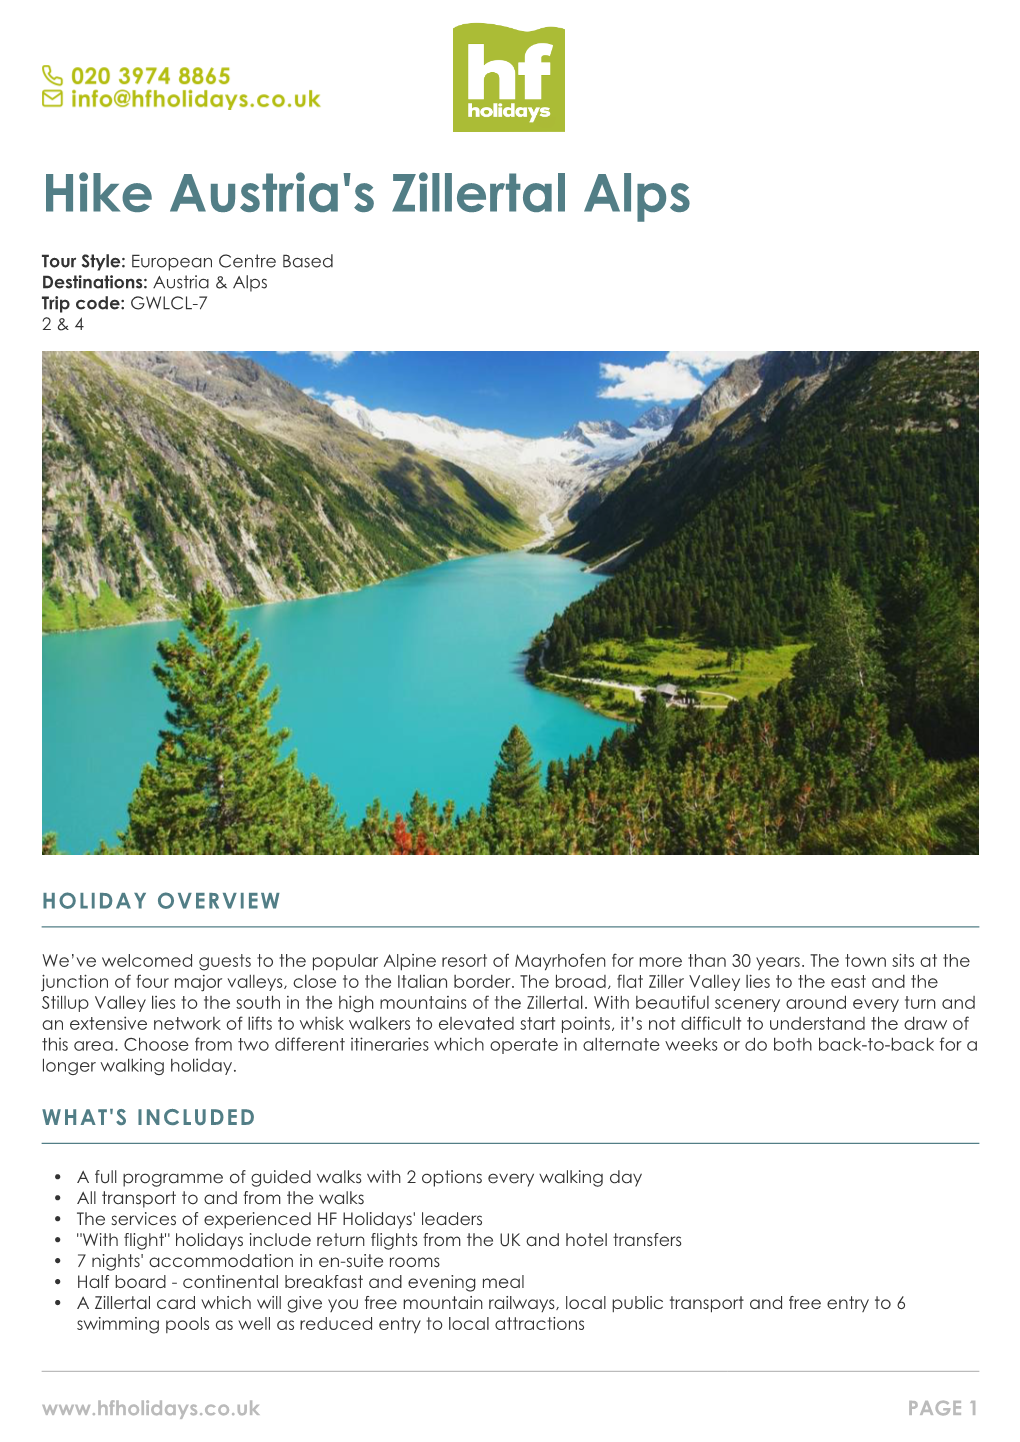 Zillertal Alps Guided Walking Holiday